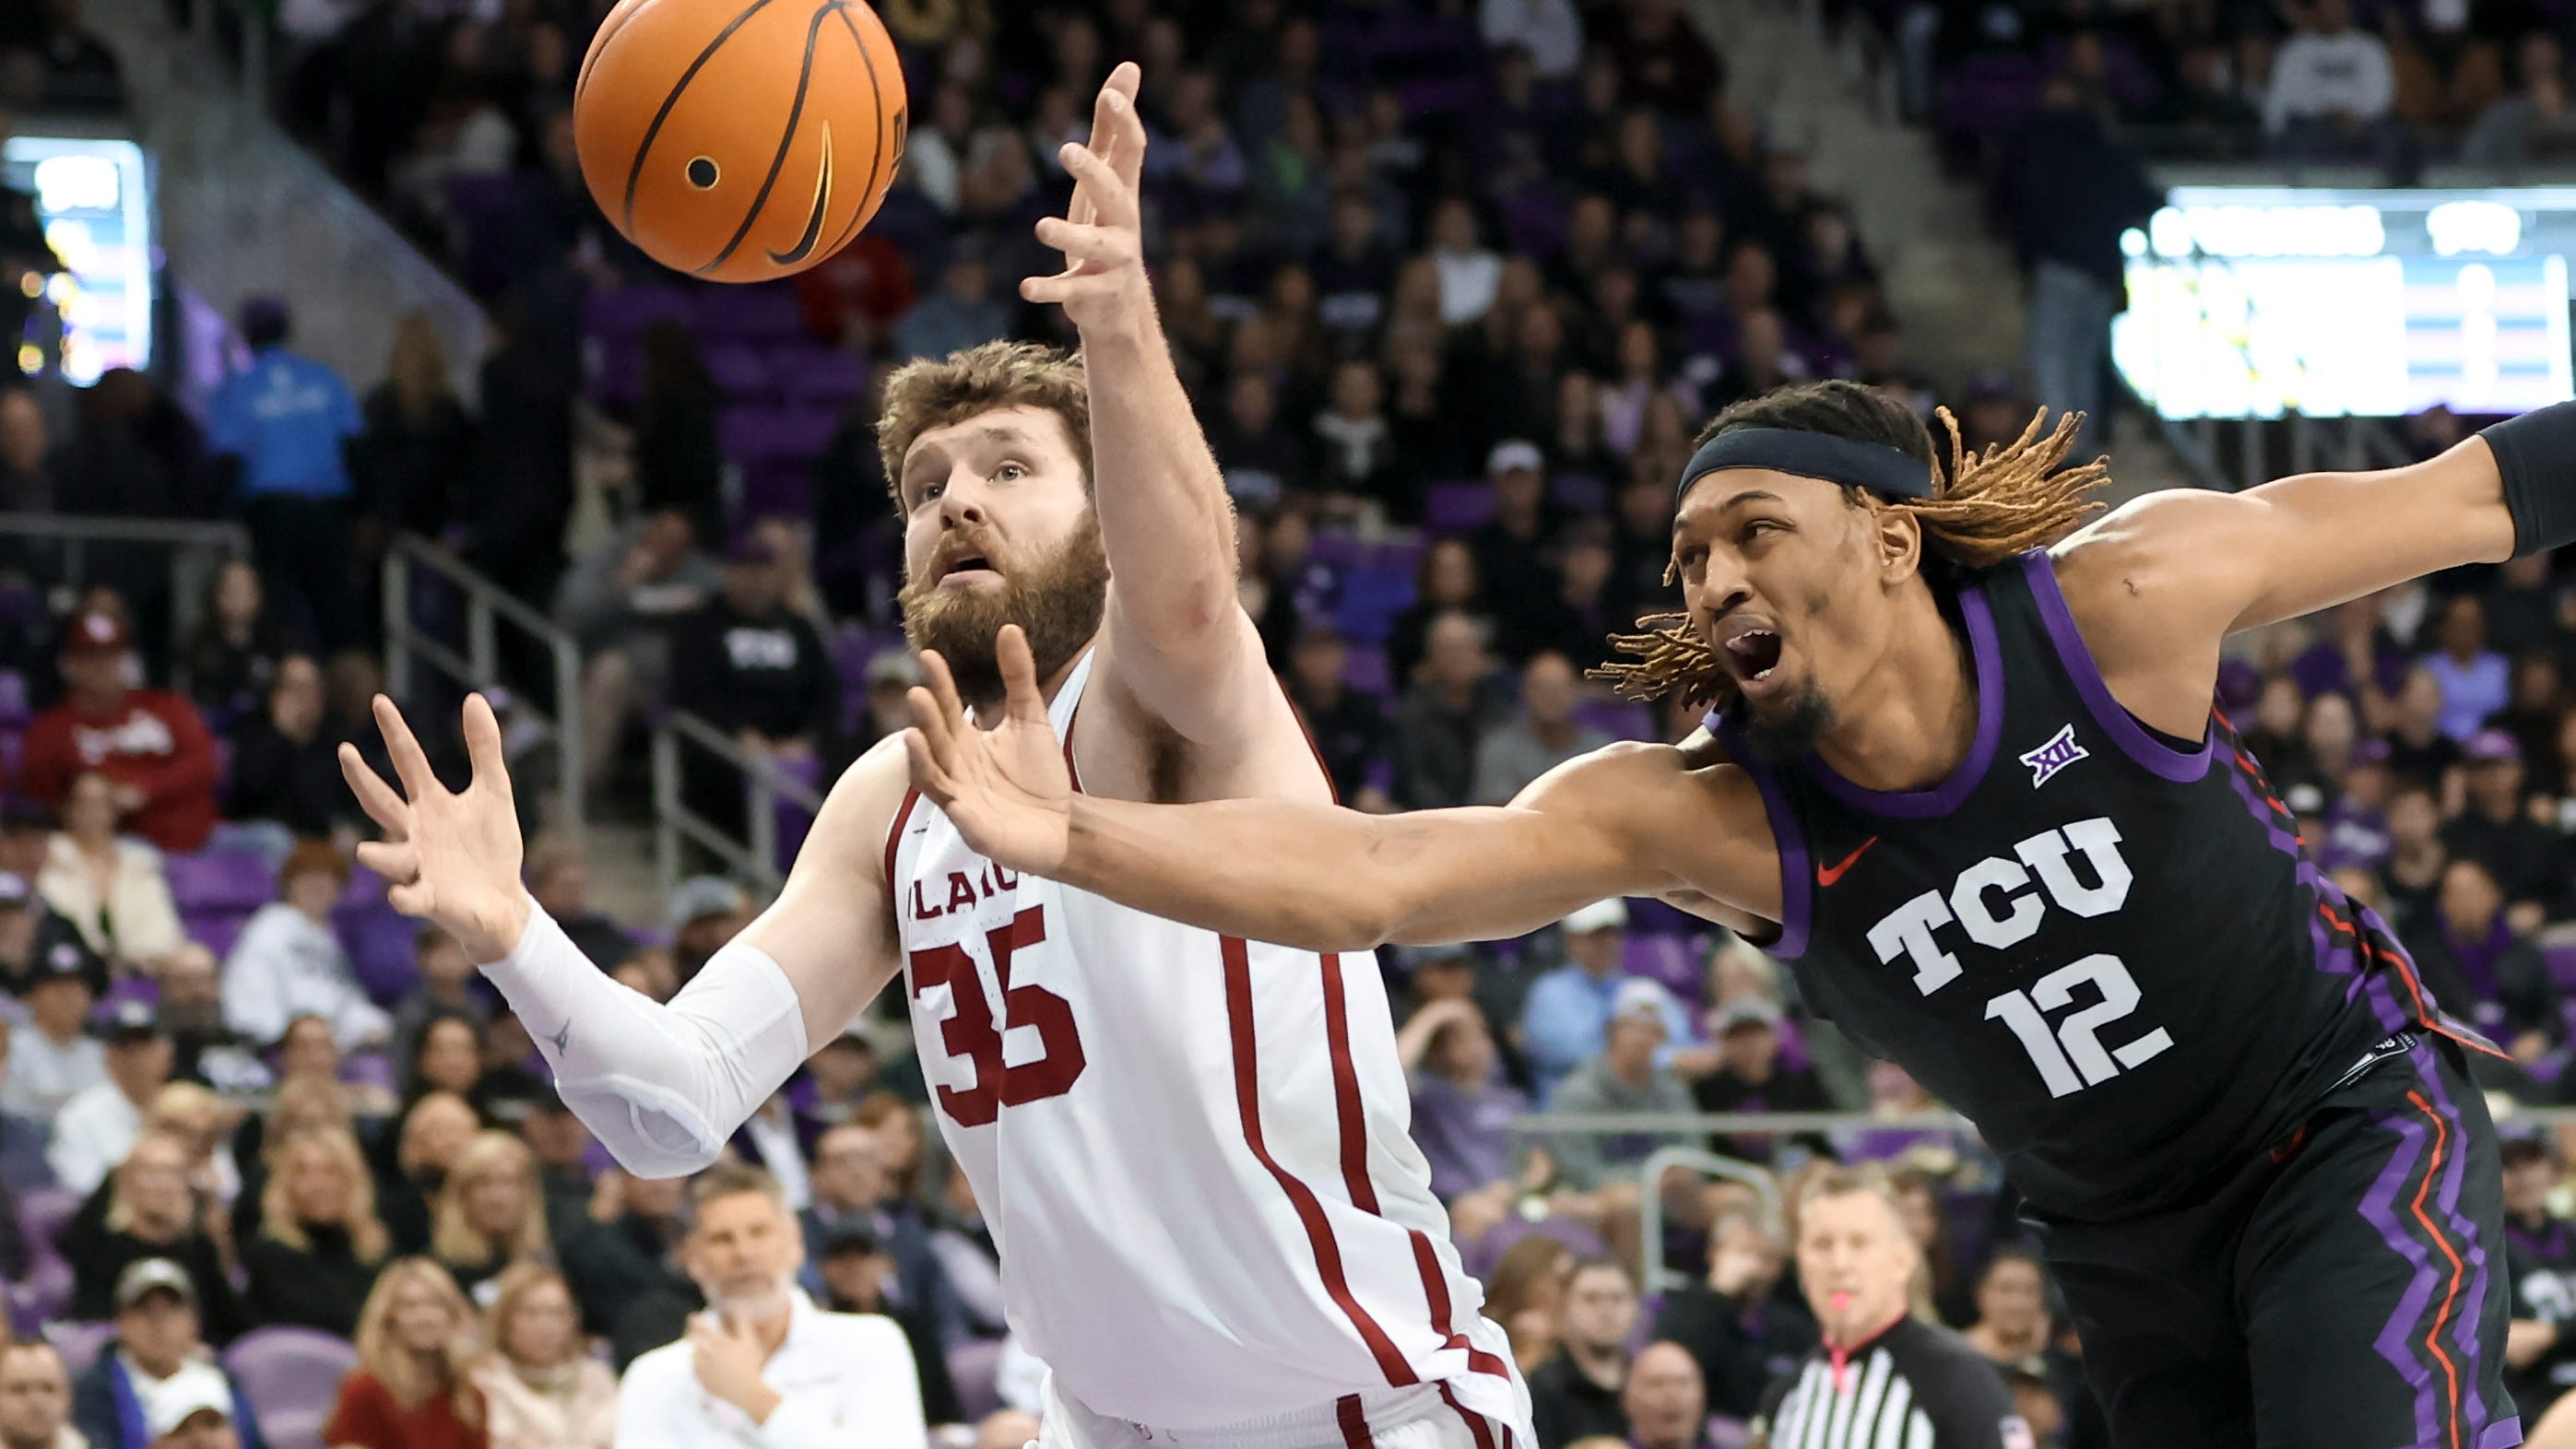 Oklahoma men's basketball falls to No. 11 TCU by largest deficit since 2019